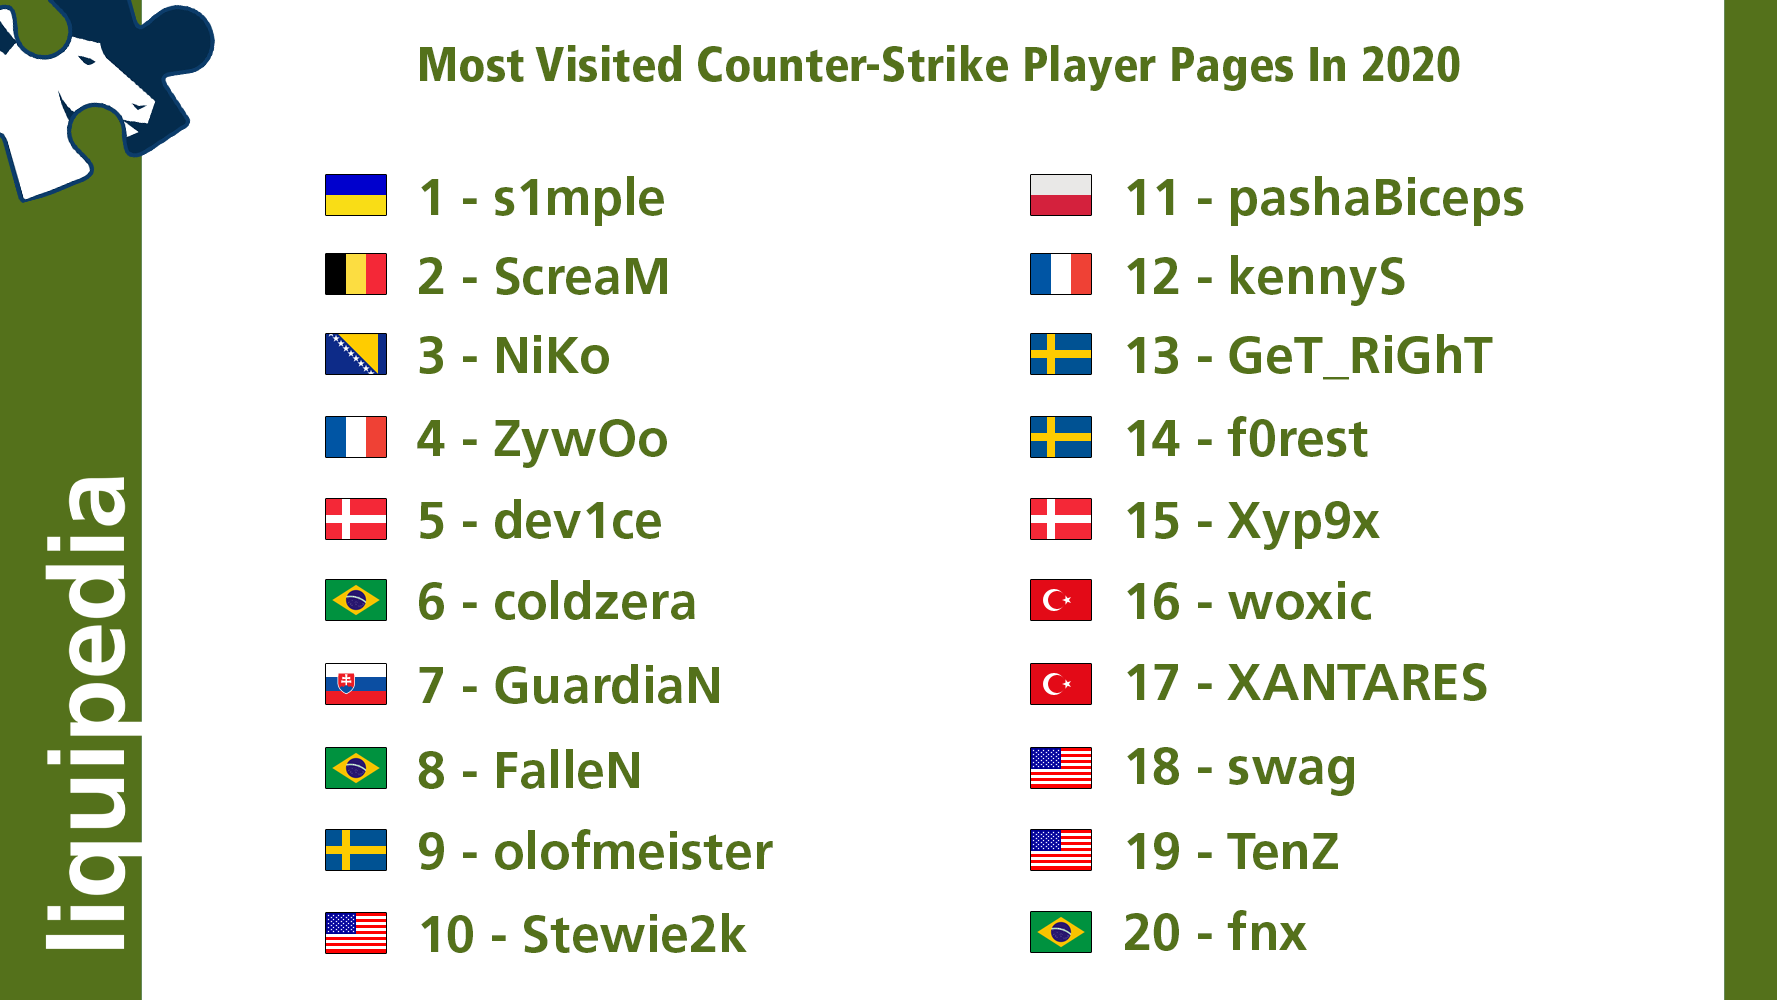 más lejos Aplastar encuesta Liquipedia Counter-Strike on Twitter: "Our Top 20 most visited player pages  in 2020: 1. 🇺🇦 @s1mpleO 2. 🇧🇪 @ScreaM_ 3. 🇧🇦 @G2NiKo 4. 🇫🇷 @zywoo  5. 🇩🇰 @dev1ce 6. 🇧🇷 @coldzera 7. 🇸🇰 @guardiancsgo 8. 🇧🇷 @FalleNCS  9. 🇸🇪 @olofmeister 10 ...